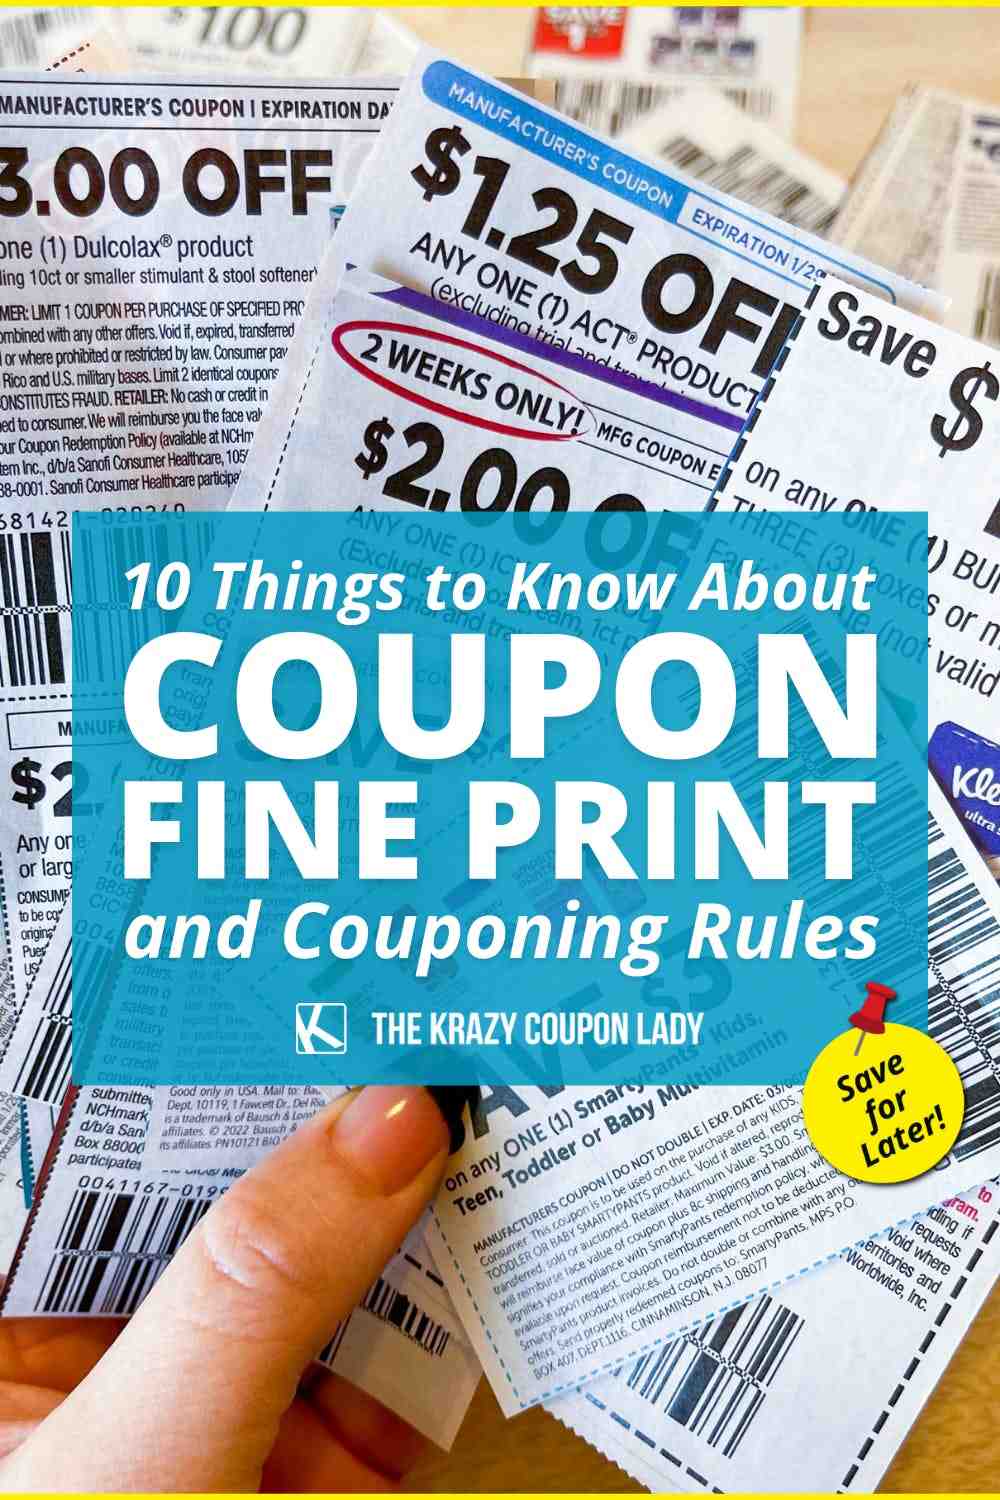 What is the coupon policy?